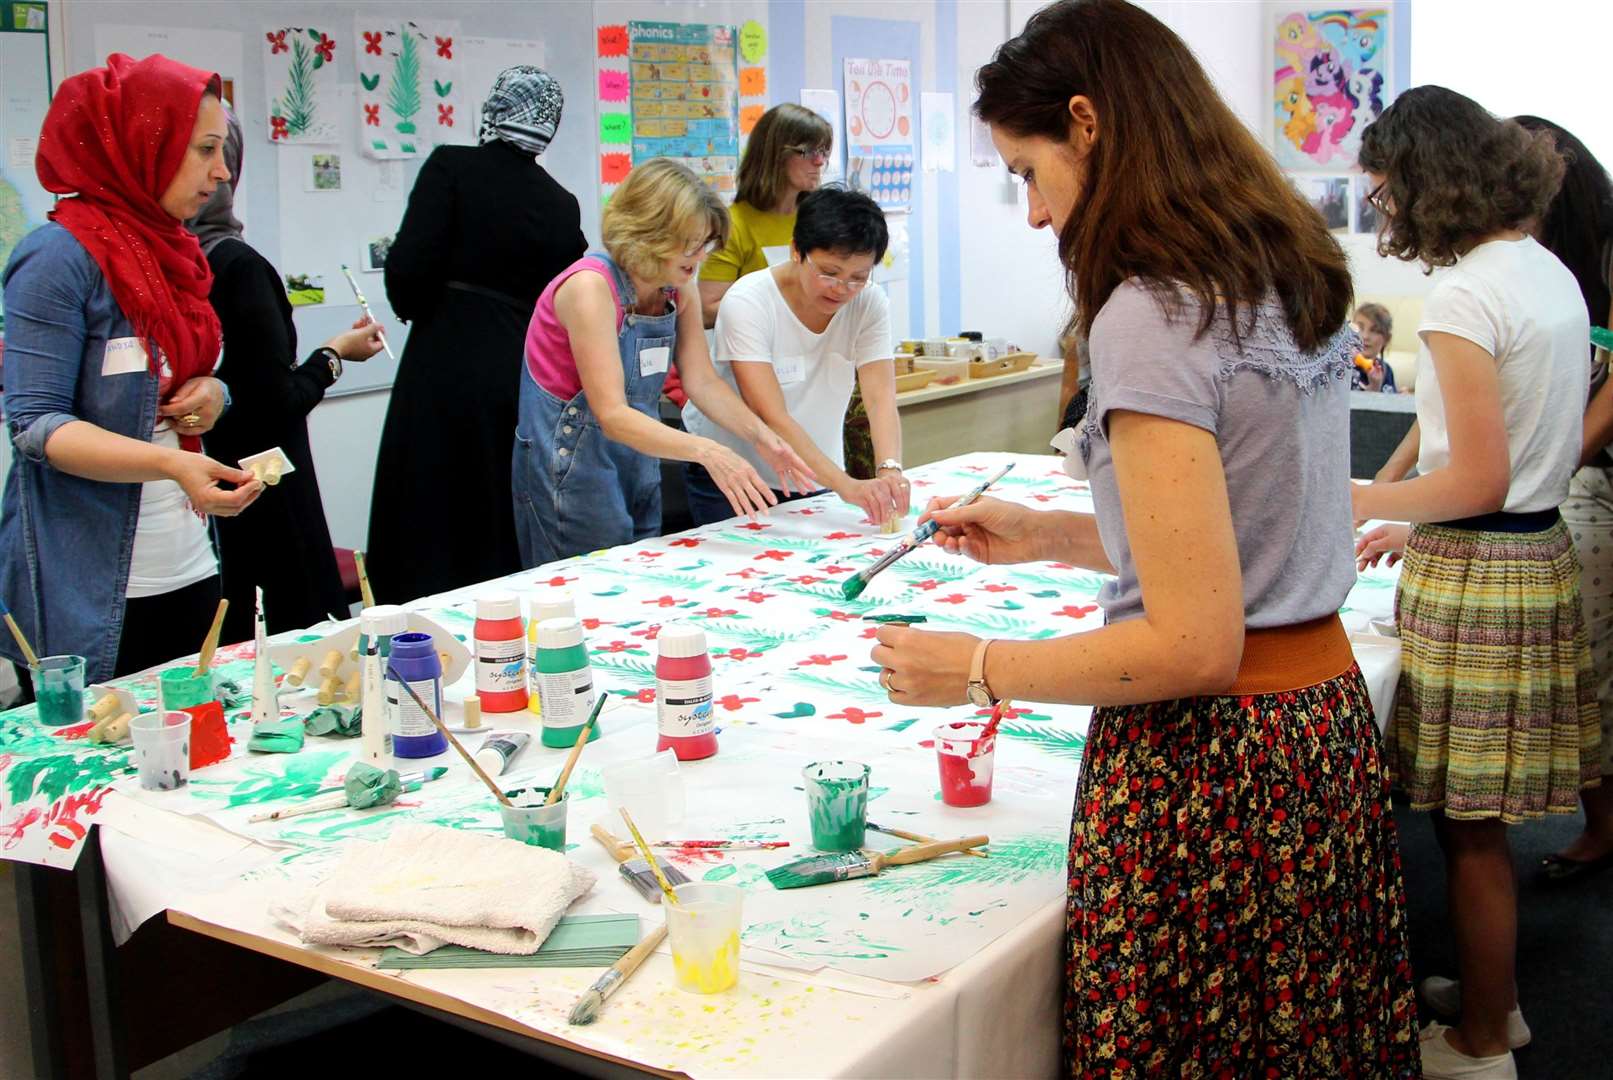 Syrian refugees taking part in community projects in Ashford. Picture: Anna Ray